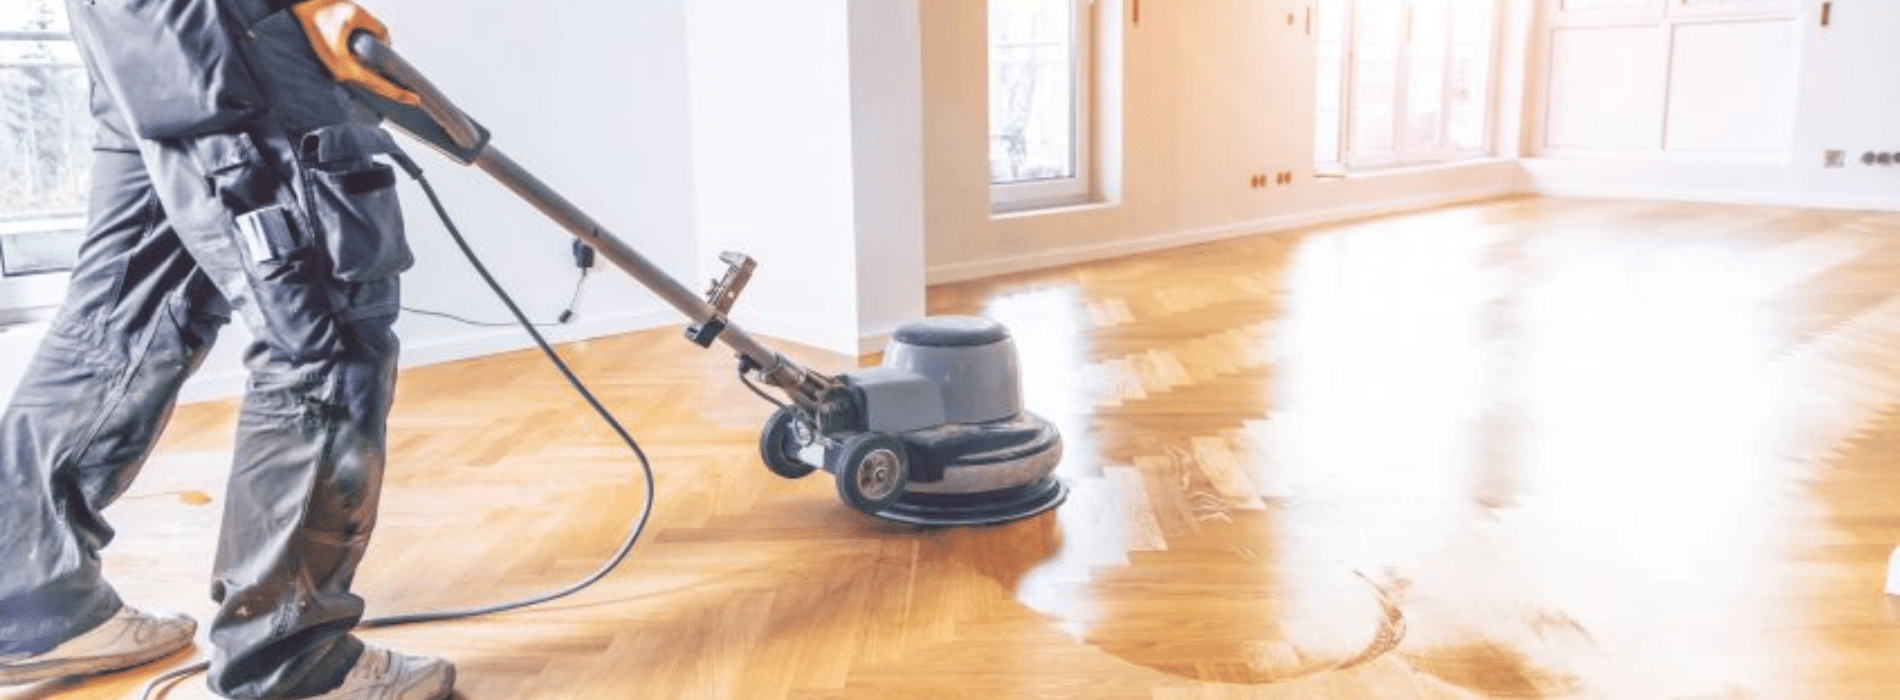 In Mayfair, W1, Mr Sander® Utilizing the High-Performance Effect 2200 Belt Sander. Voltage: 220V, Frequency: 60Hz. Witness the Precision and Efficiency on a 250x650 mm Herringbone Floor with HEPA-Filtered Dust Extraction for a Flawless Finish.